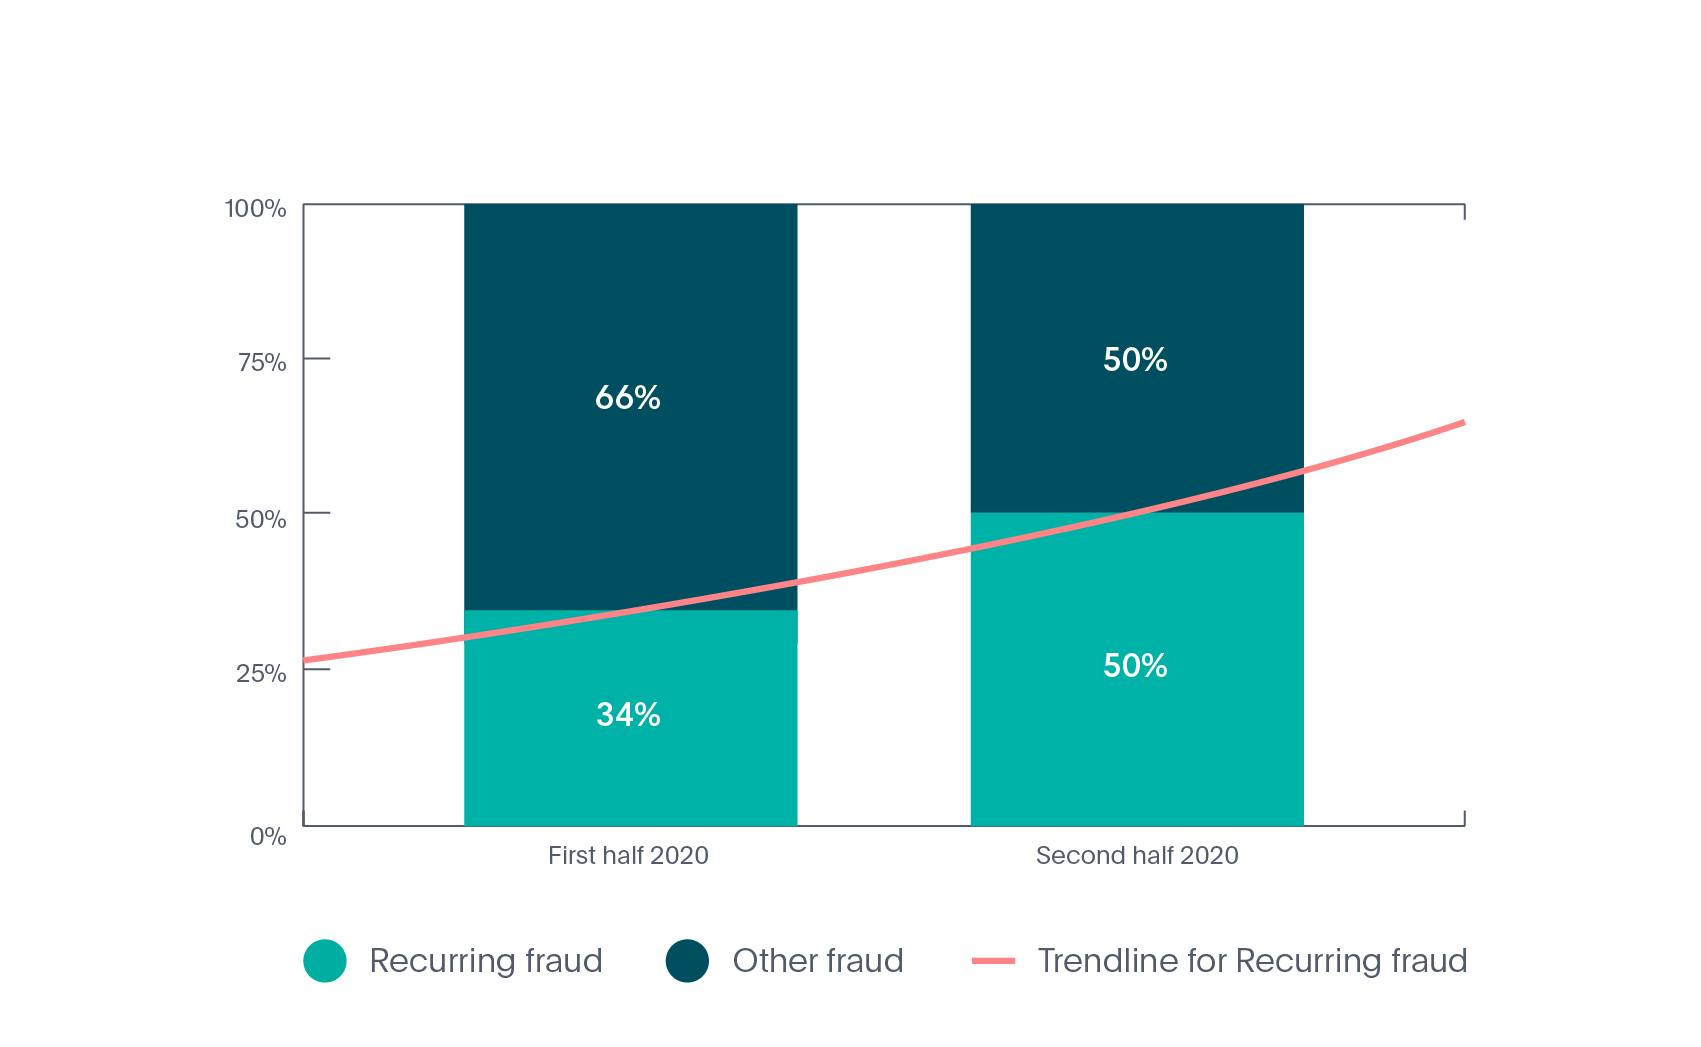 Online recurring identity fraud rate in Mobility industry in 2020